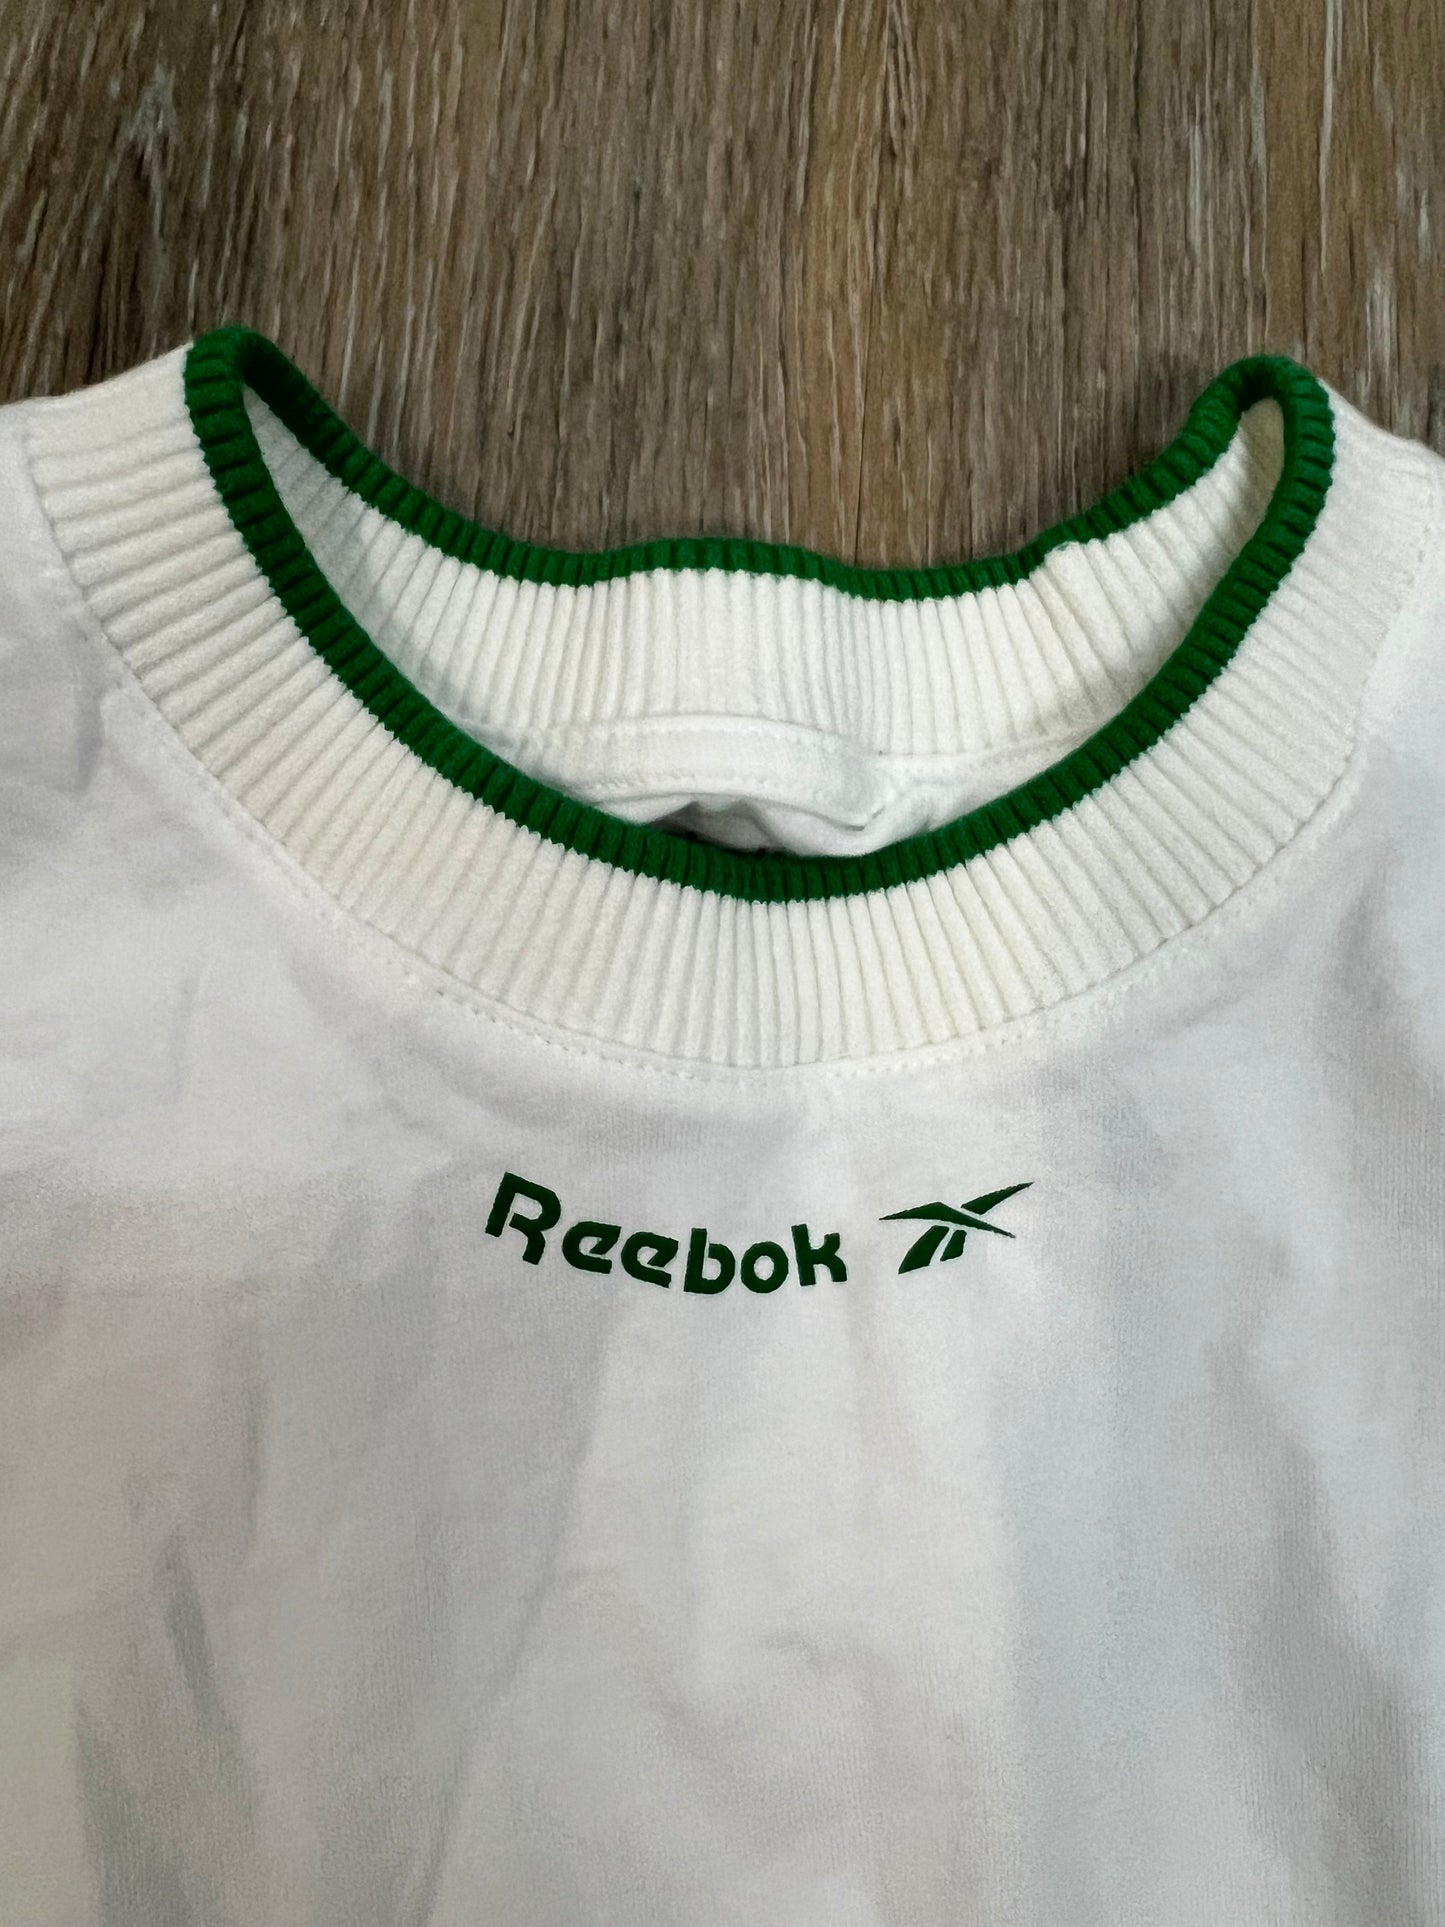 White Athletic Top Short Sleeve Reebok, Size L